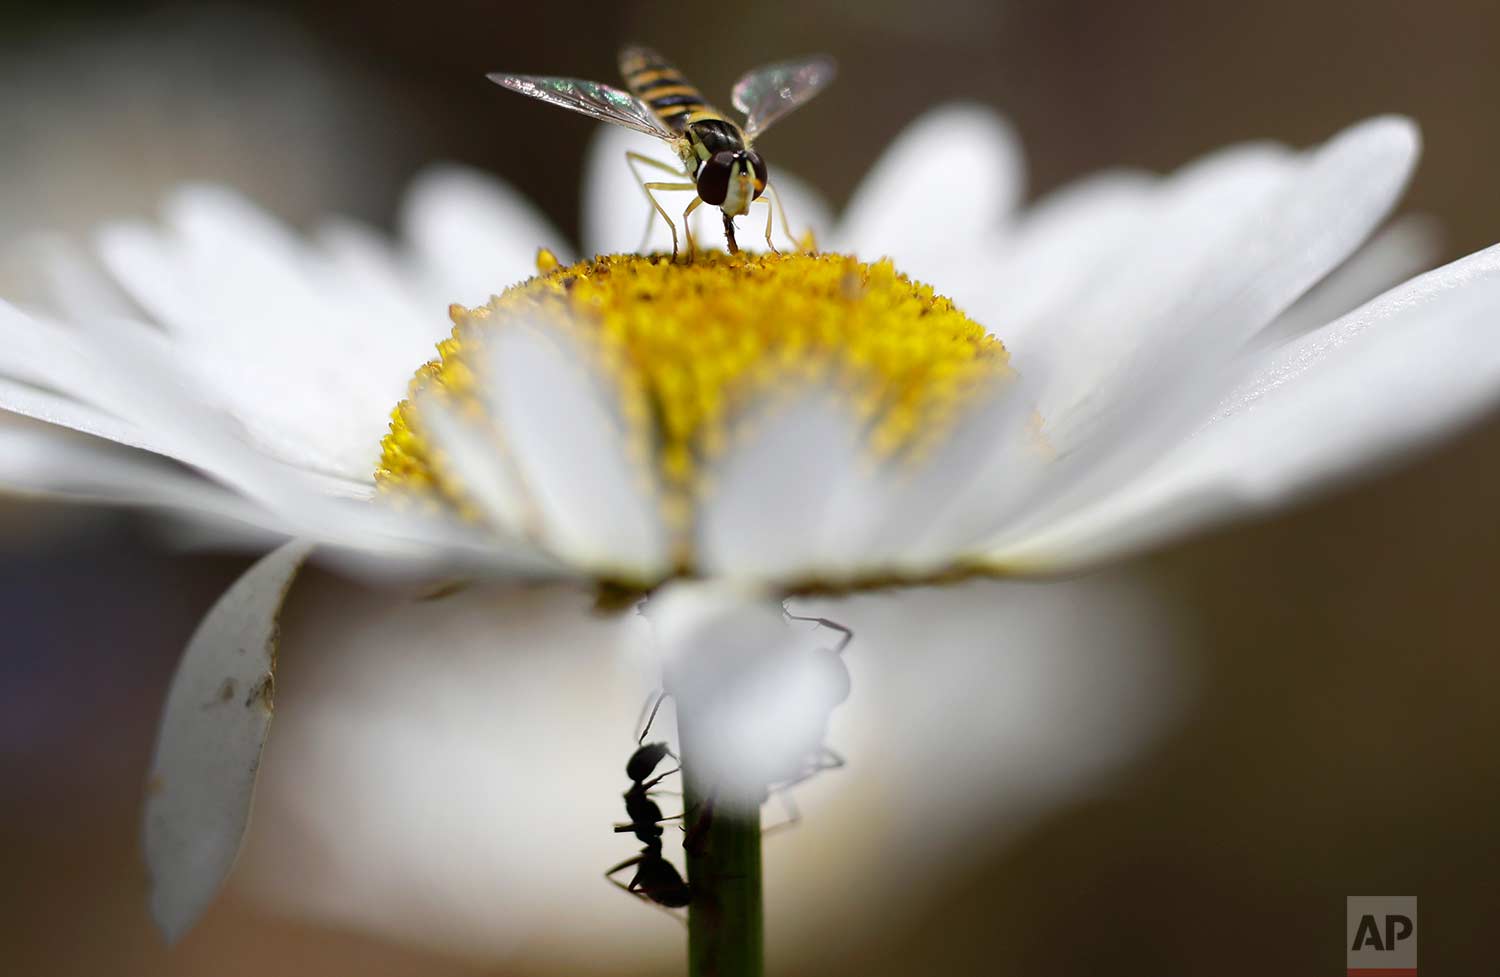  In this Friday, July 21, 2017 photo, a fly, above, and the ant feed on chamomile nectar in a field on the outskirts of Minsk, Belarus, during a sunny summer's day. (AP Photo/Sergei Grits) 